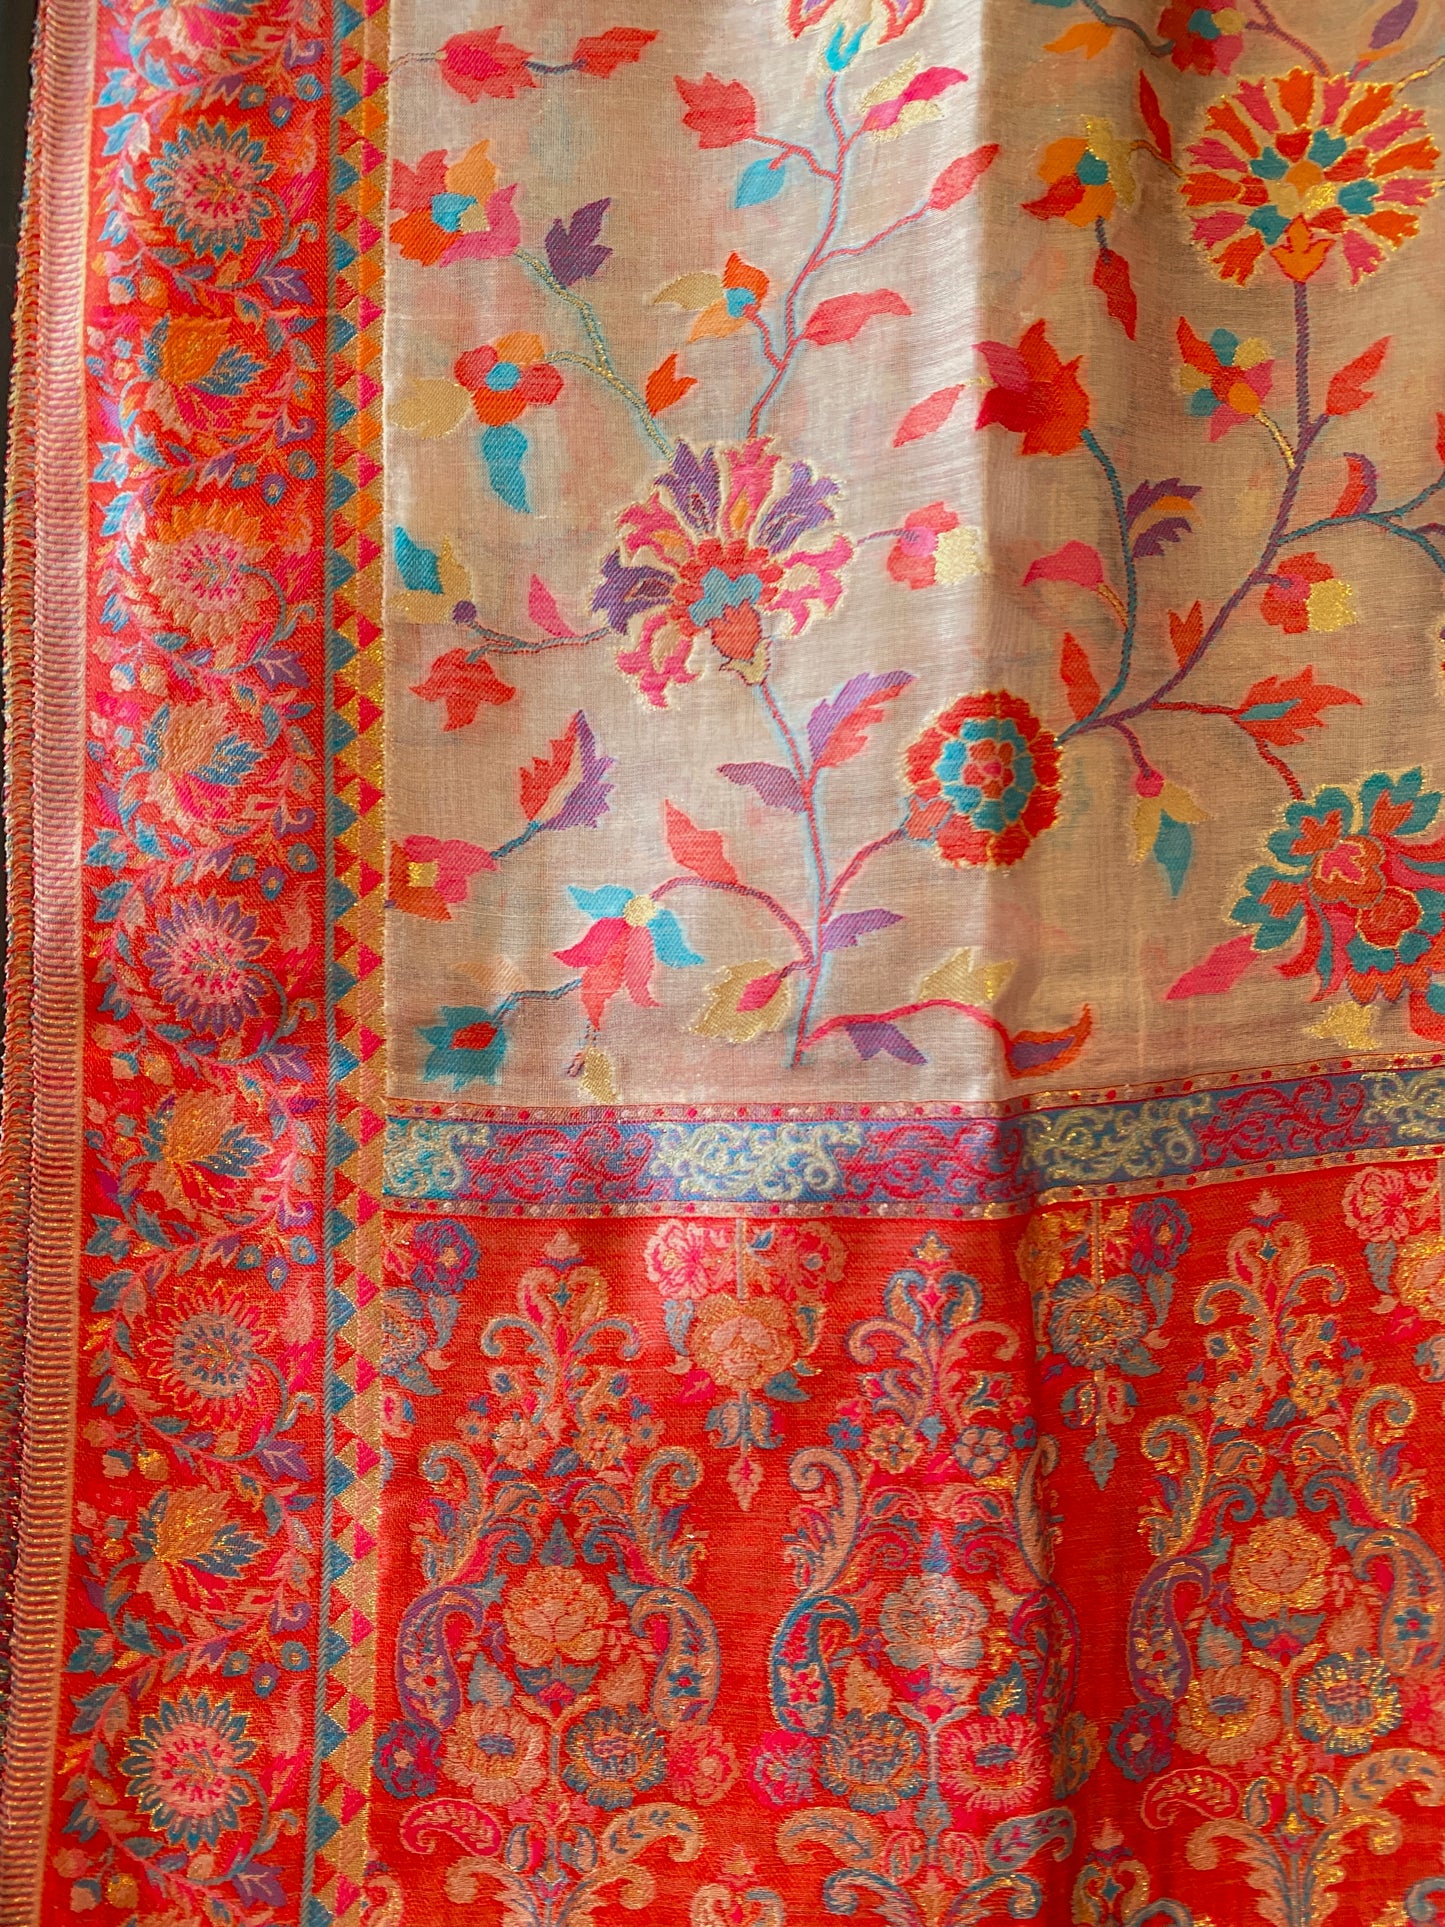 Kani Design Silk Saree Shawl in Natural and Red Flower pattern